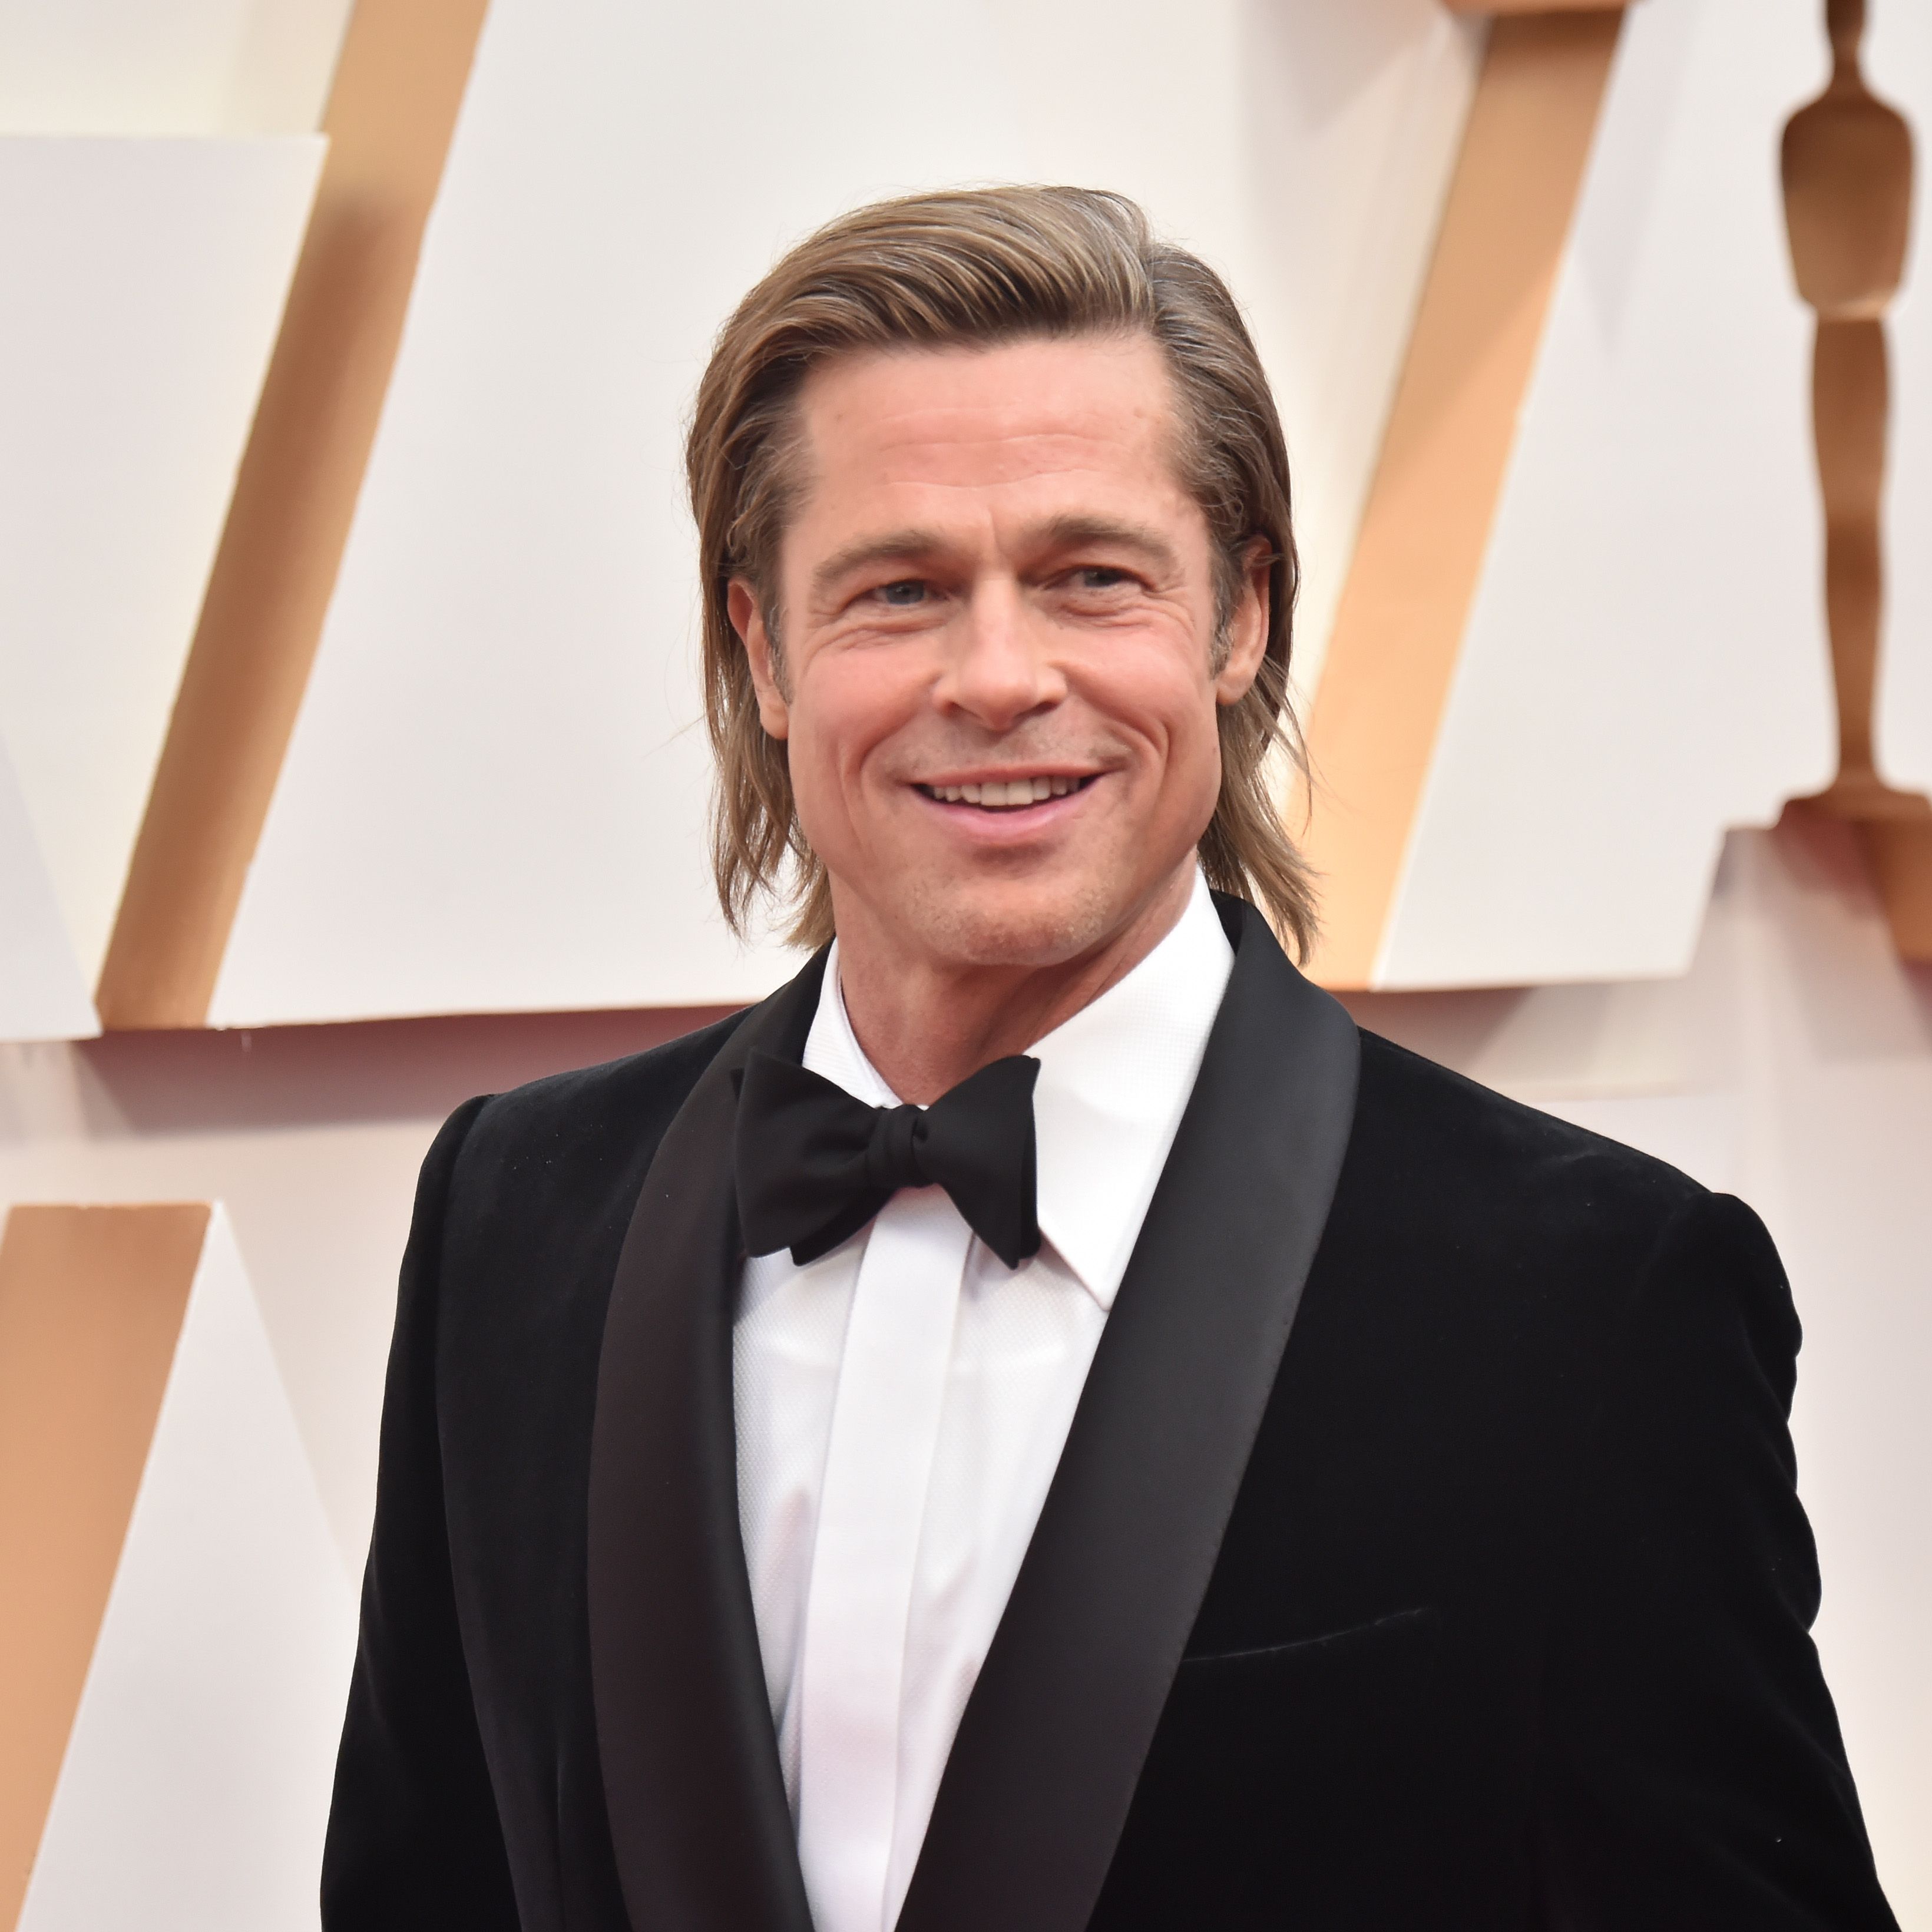 Brad Pitt Steps Out in France With German Model Nicole Poturalski